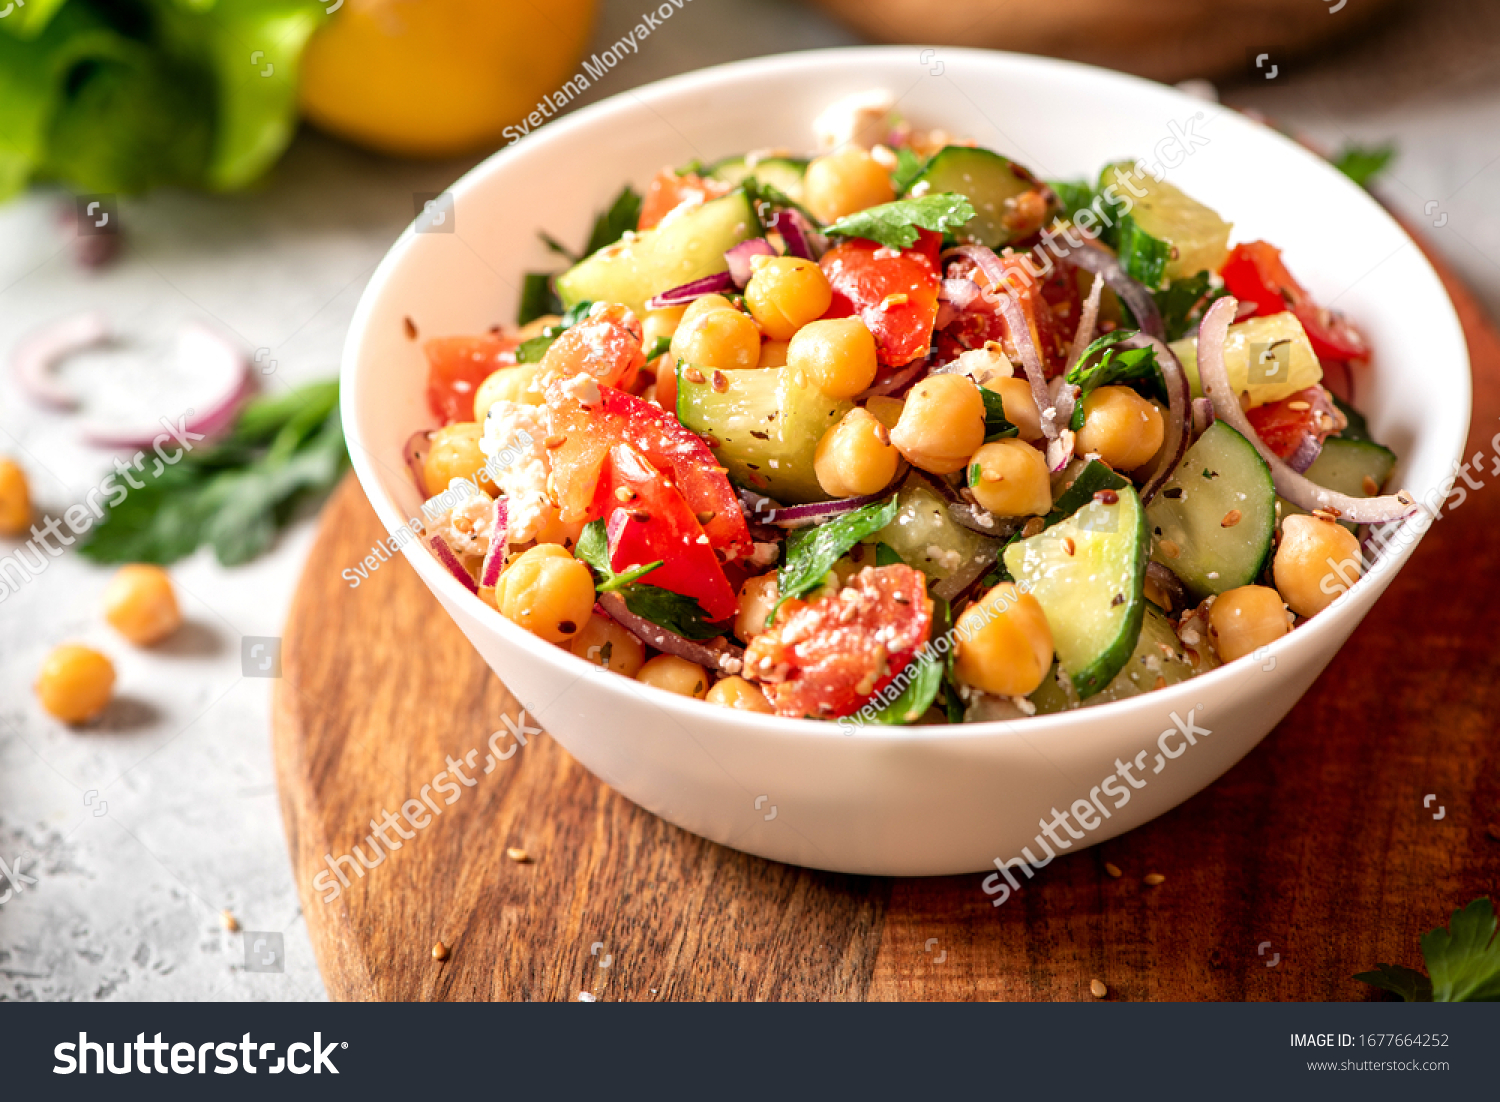 Chickpea salad with tomatoes, cucumber, feta cheese, parsley, onions and lemon in a plate on a served table, selective focus. Tasty and healthy vegetarian food, oriental and Mediterranean cuisine. #1677664252